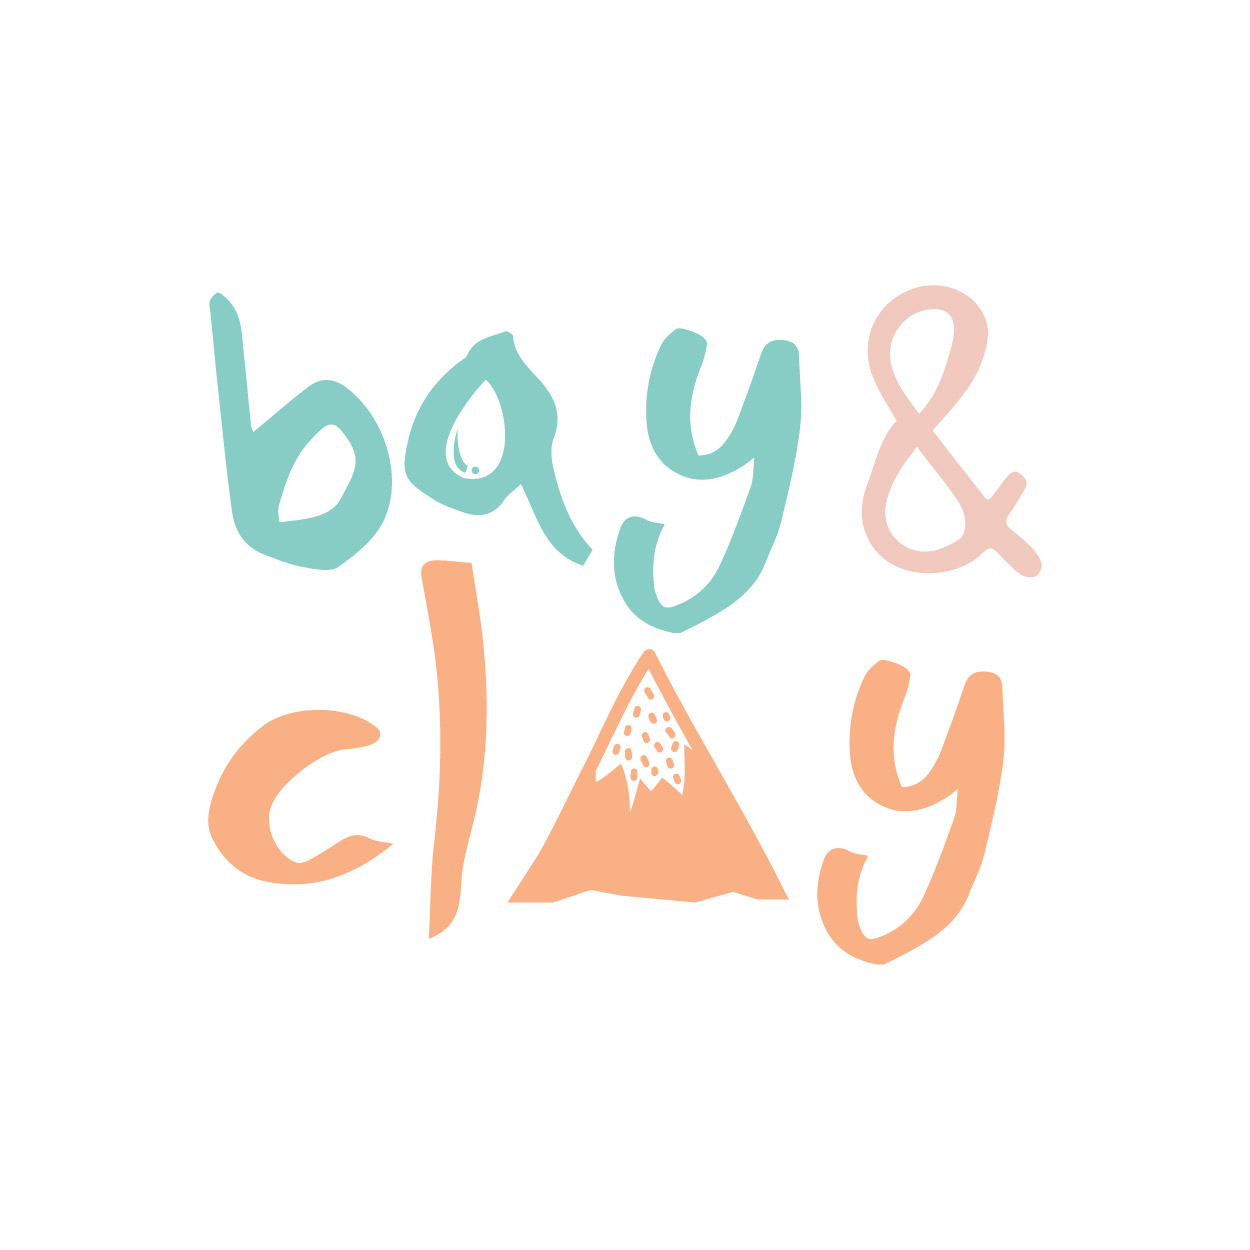 Bay and Clay